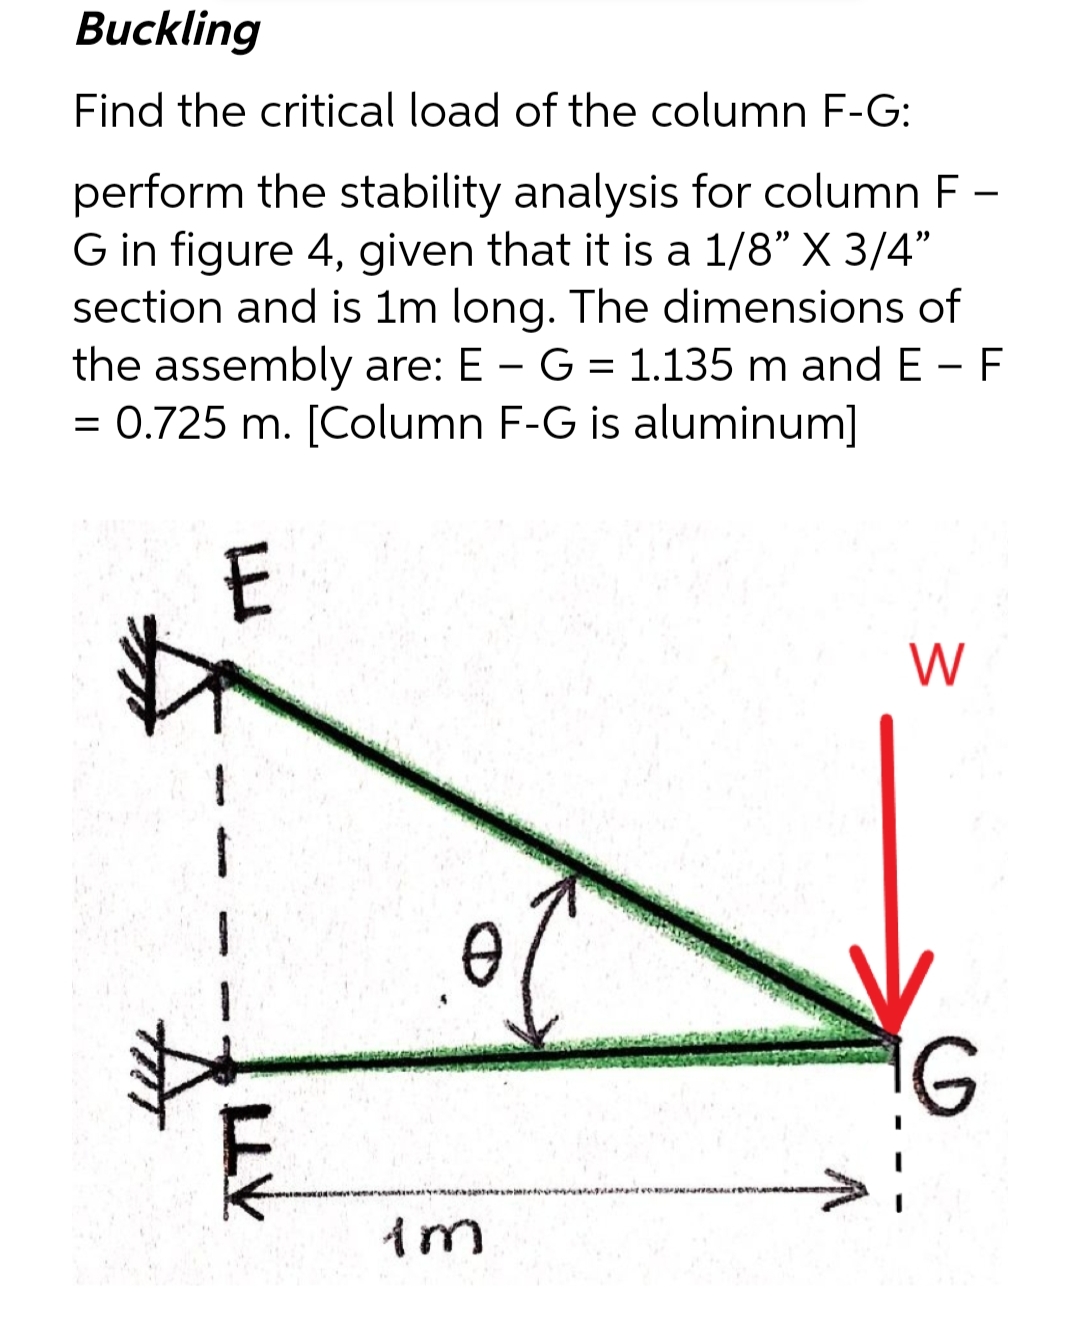 Buckling
Find the critical load of the column F-G:
perform the stability analysis for column F-
G in figure 4, given that it is a 1/8" X 3/4"
section and is 1m long. The dimensions of
the assembly are: E - G = 1.135 m and EF
= 0.725 m. [Column F-G is aluminum]
E
LLV
0
im
W
G